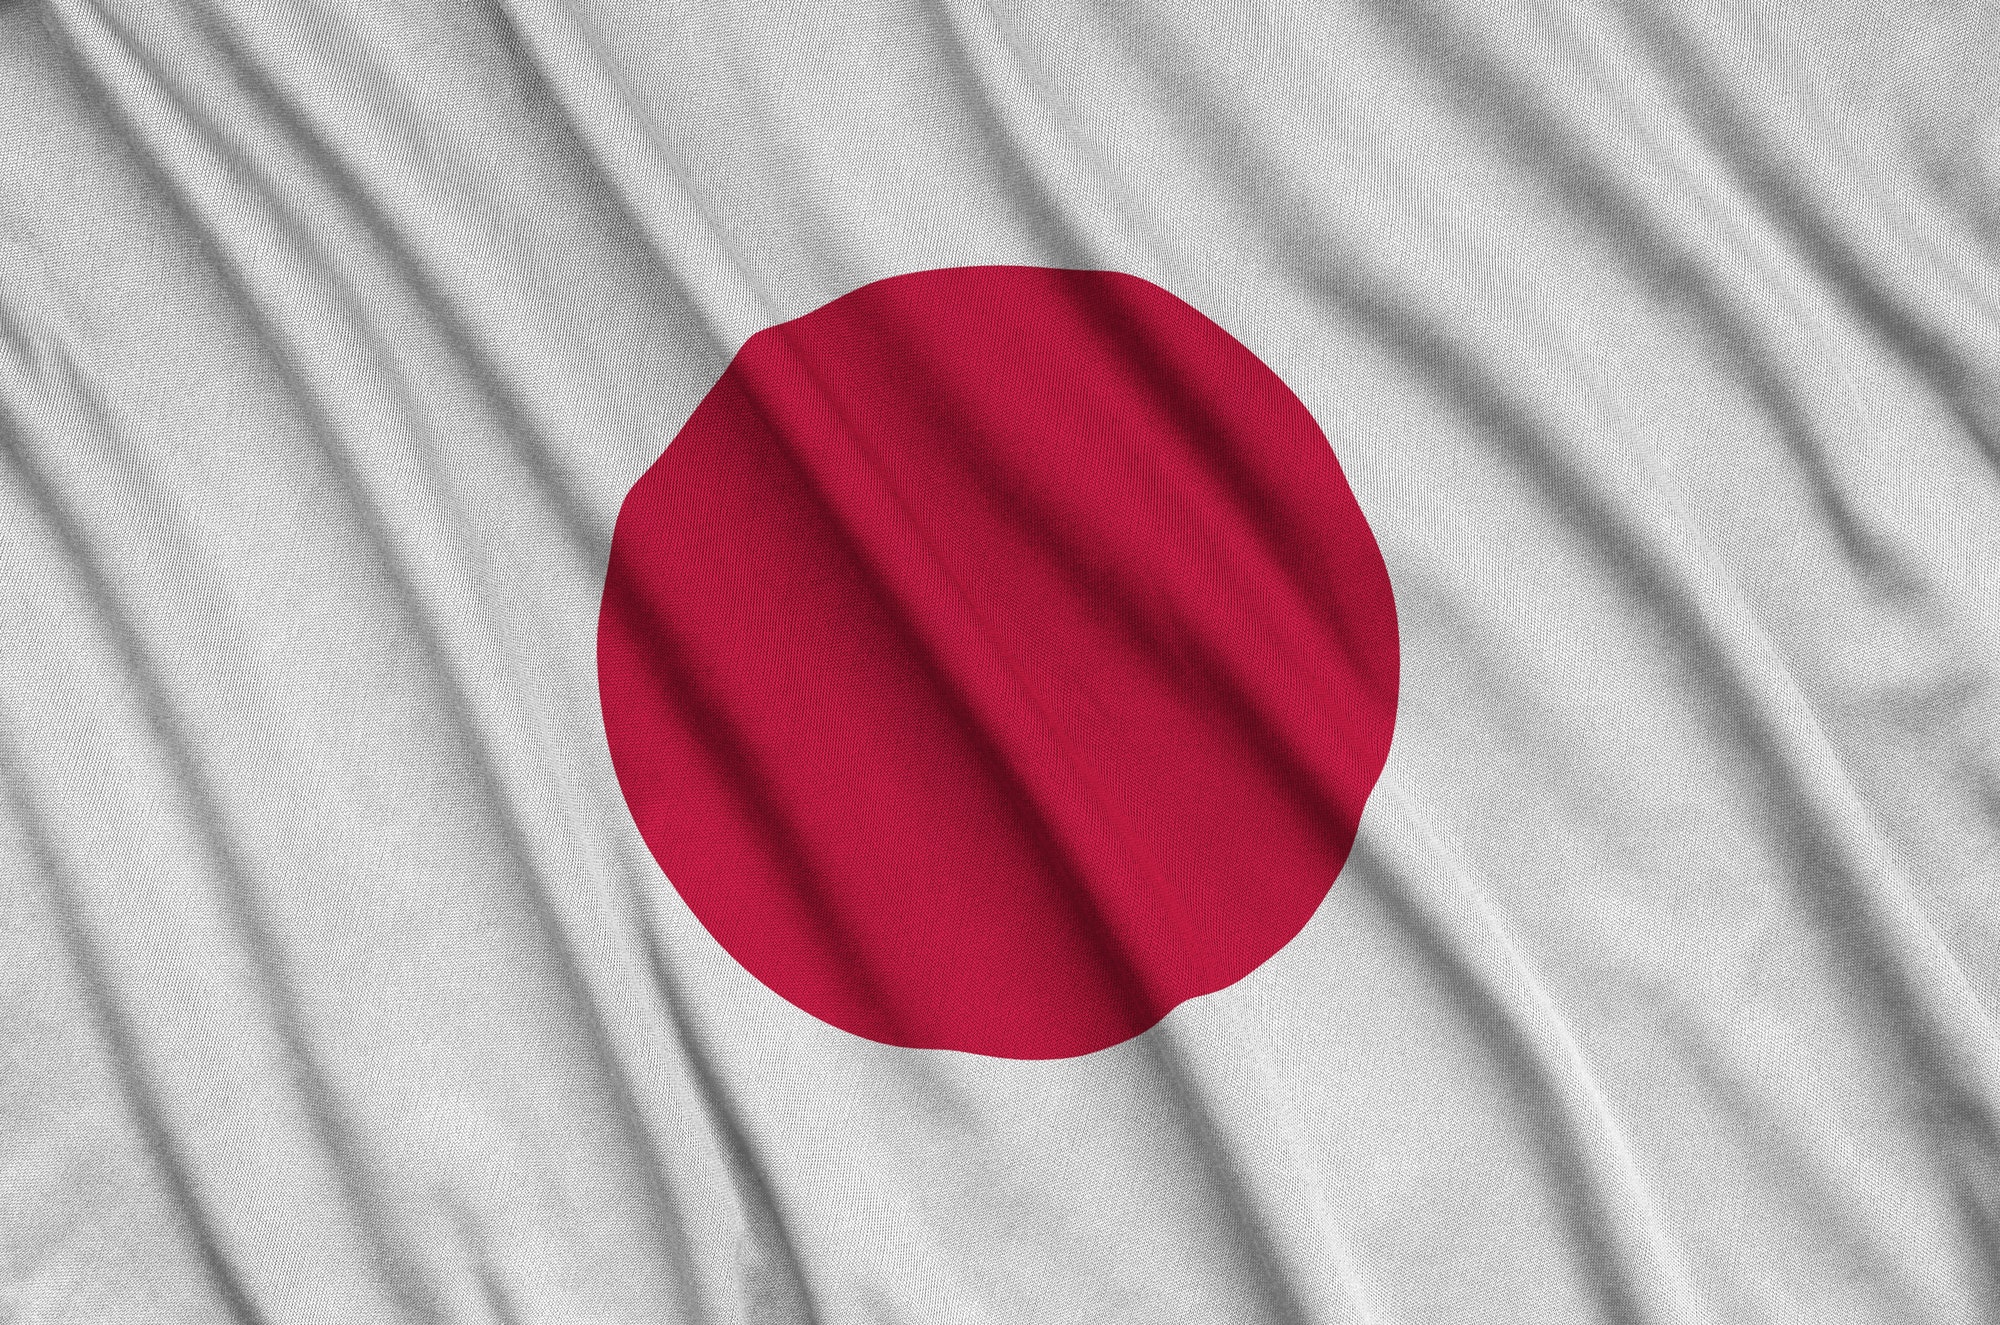 japan-flag-is-depicted-on-a-sports-cloth-fabric-with-many-folds-sport-team-waving-banner.jpg